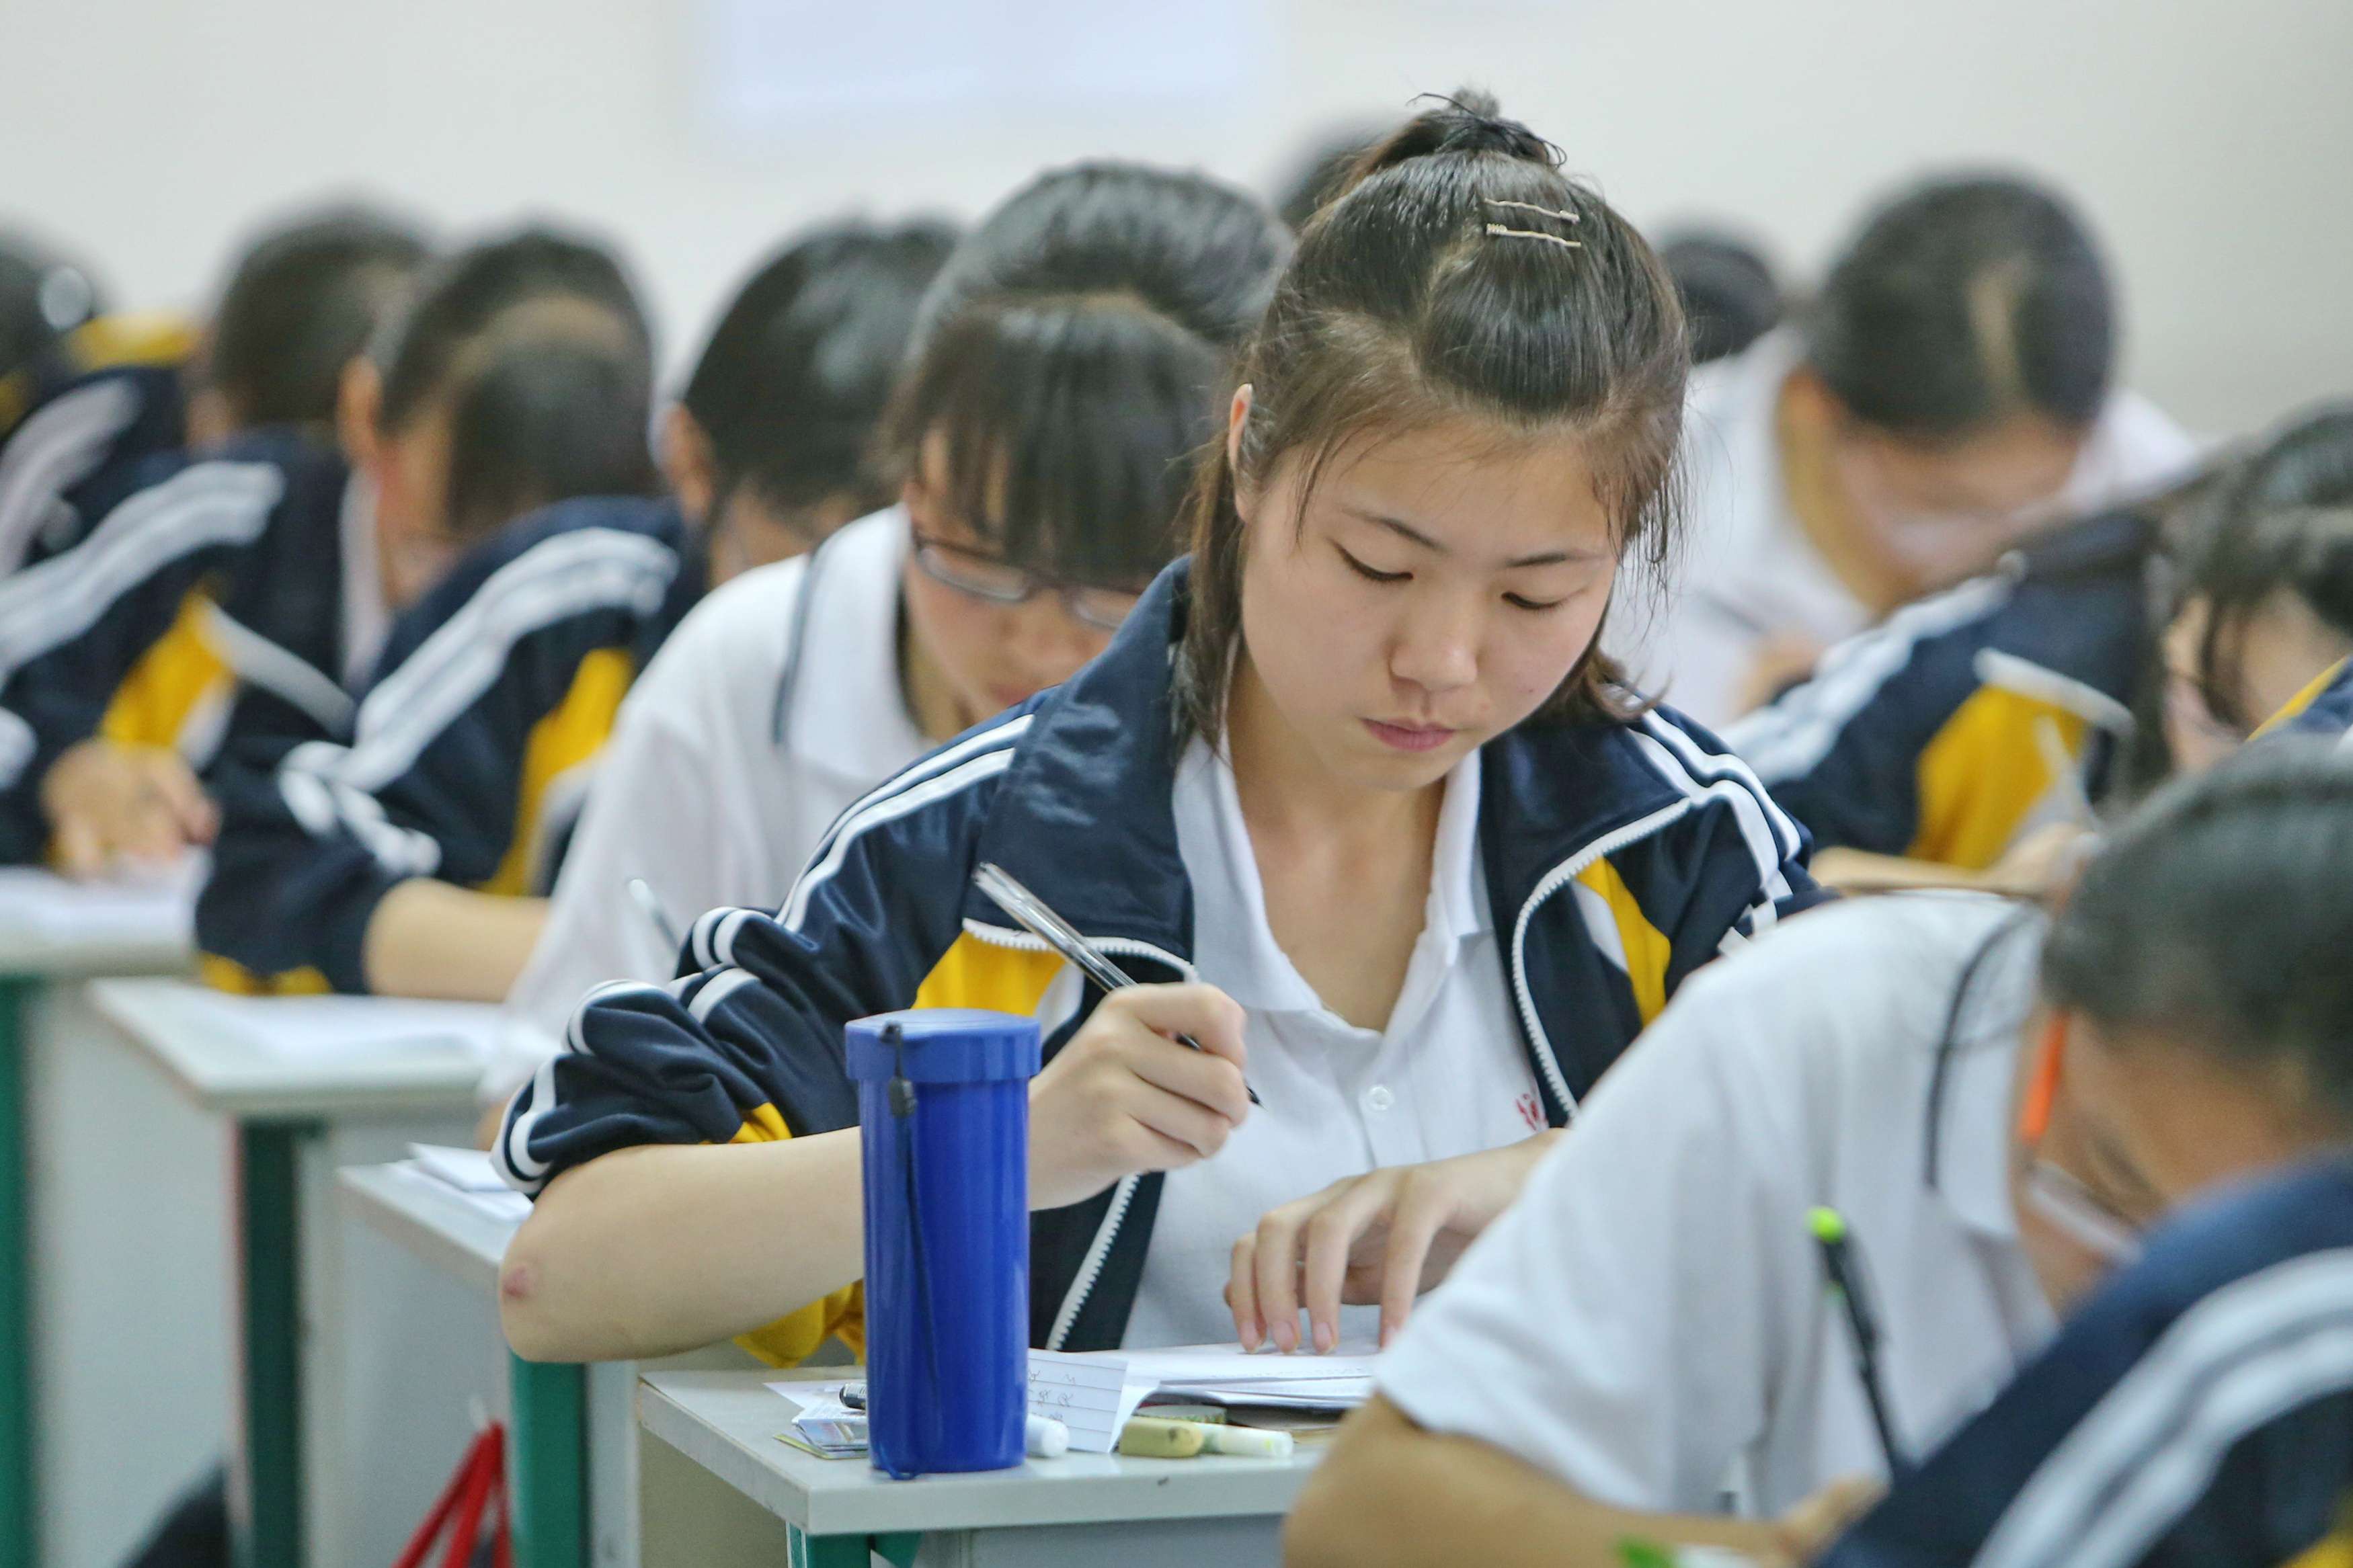 Economist Intelligence Unit report commissioned by newly launched Yidan Prize Foundation stresses need to integrate technology in classrooms, and prioritise vocational training and adaptability